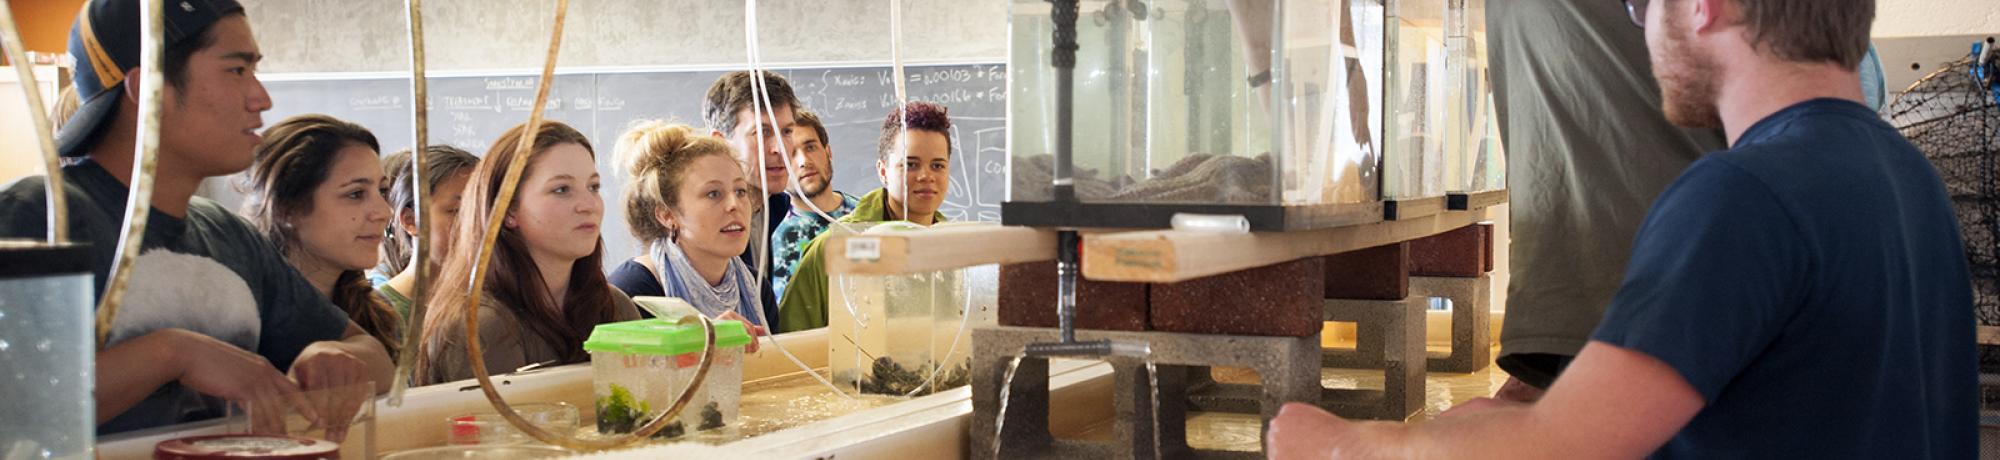 A group of undergraduate students gathered around to watch a professor teaching in front of a glass tank full of seawater.